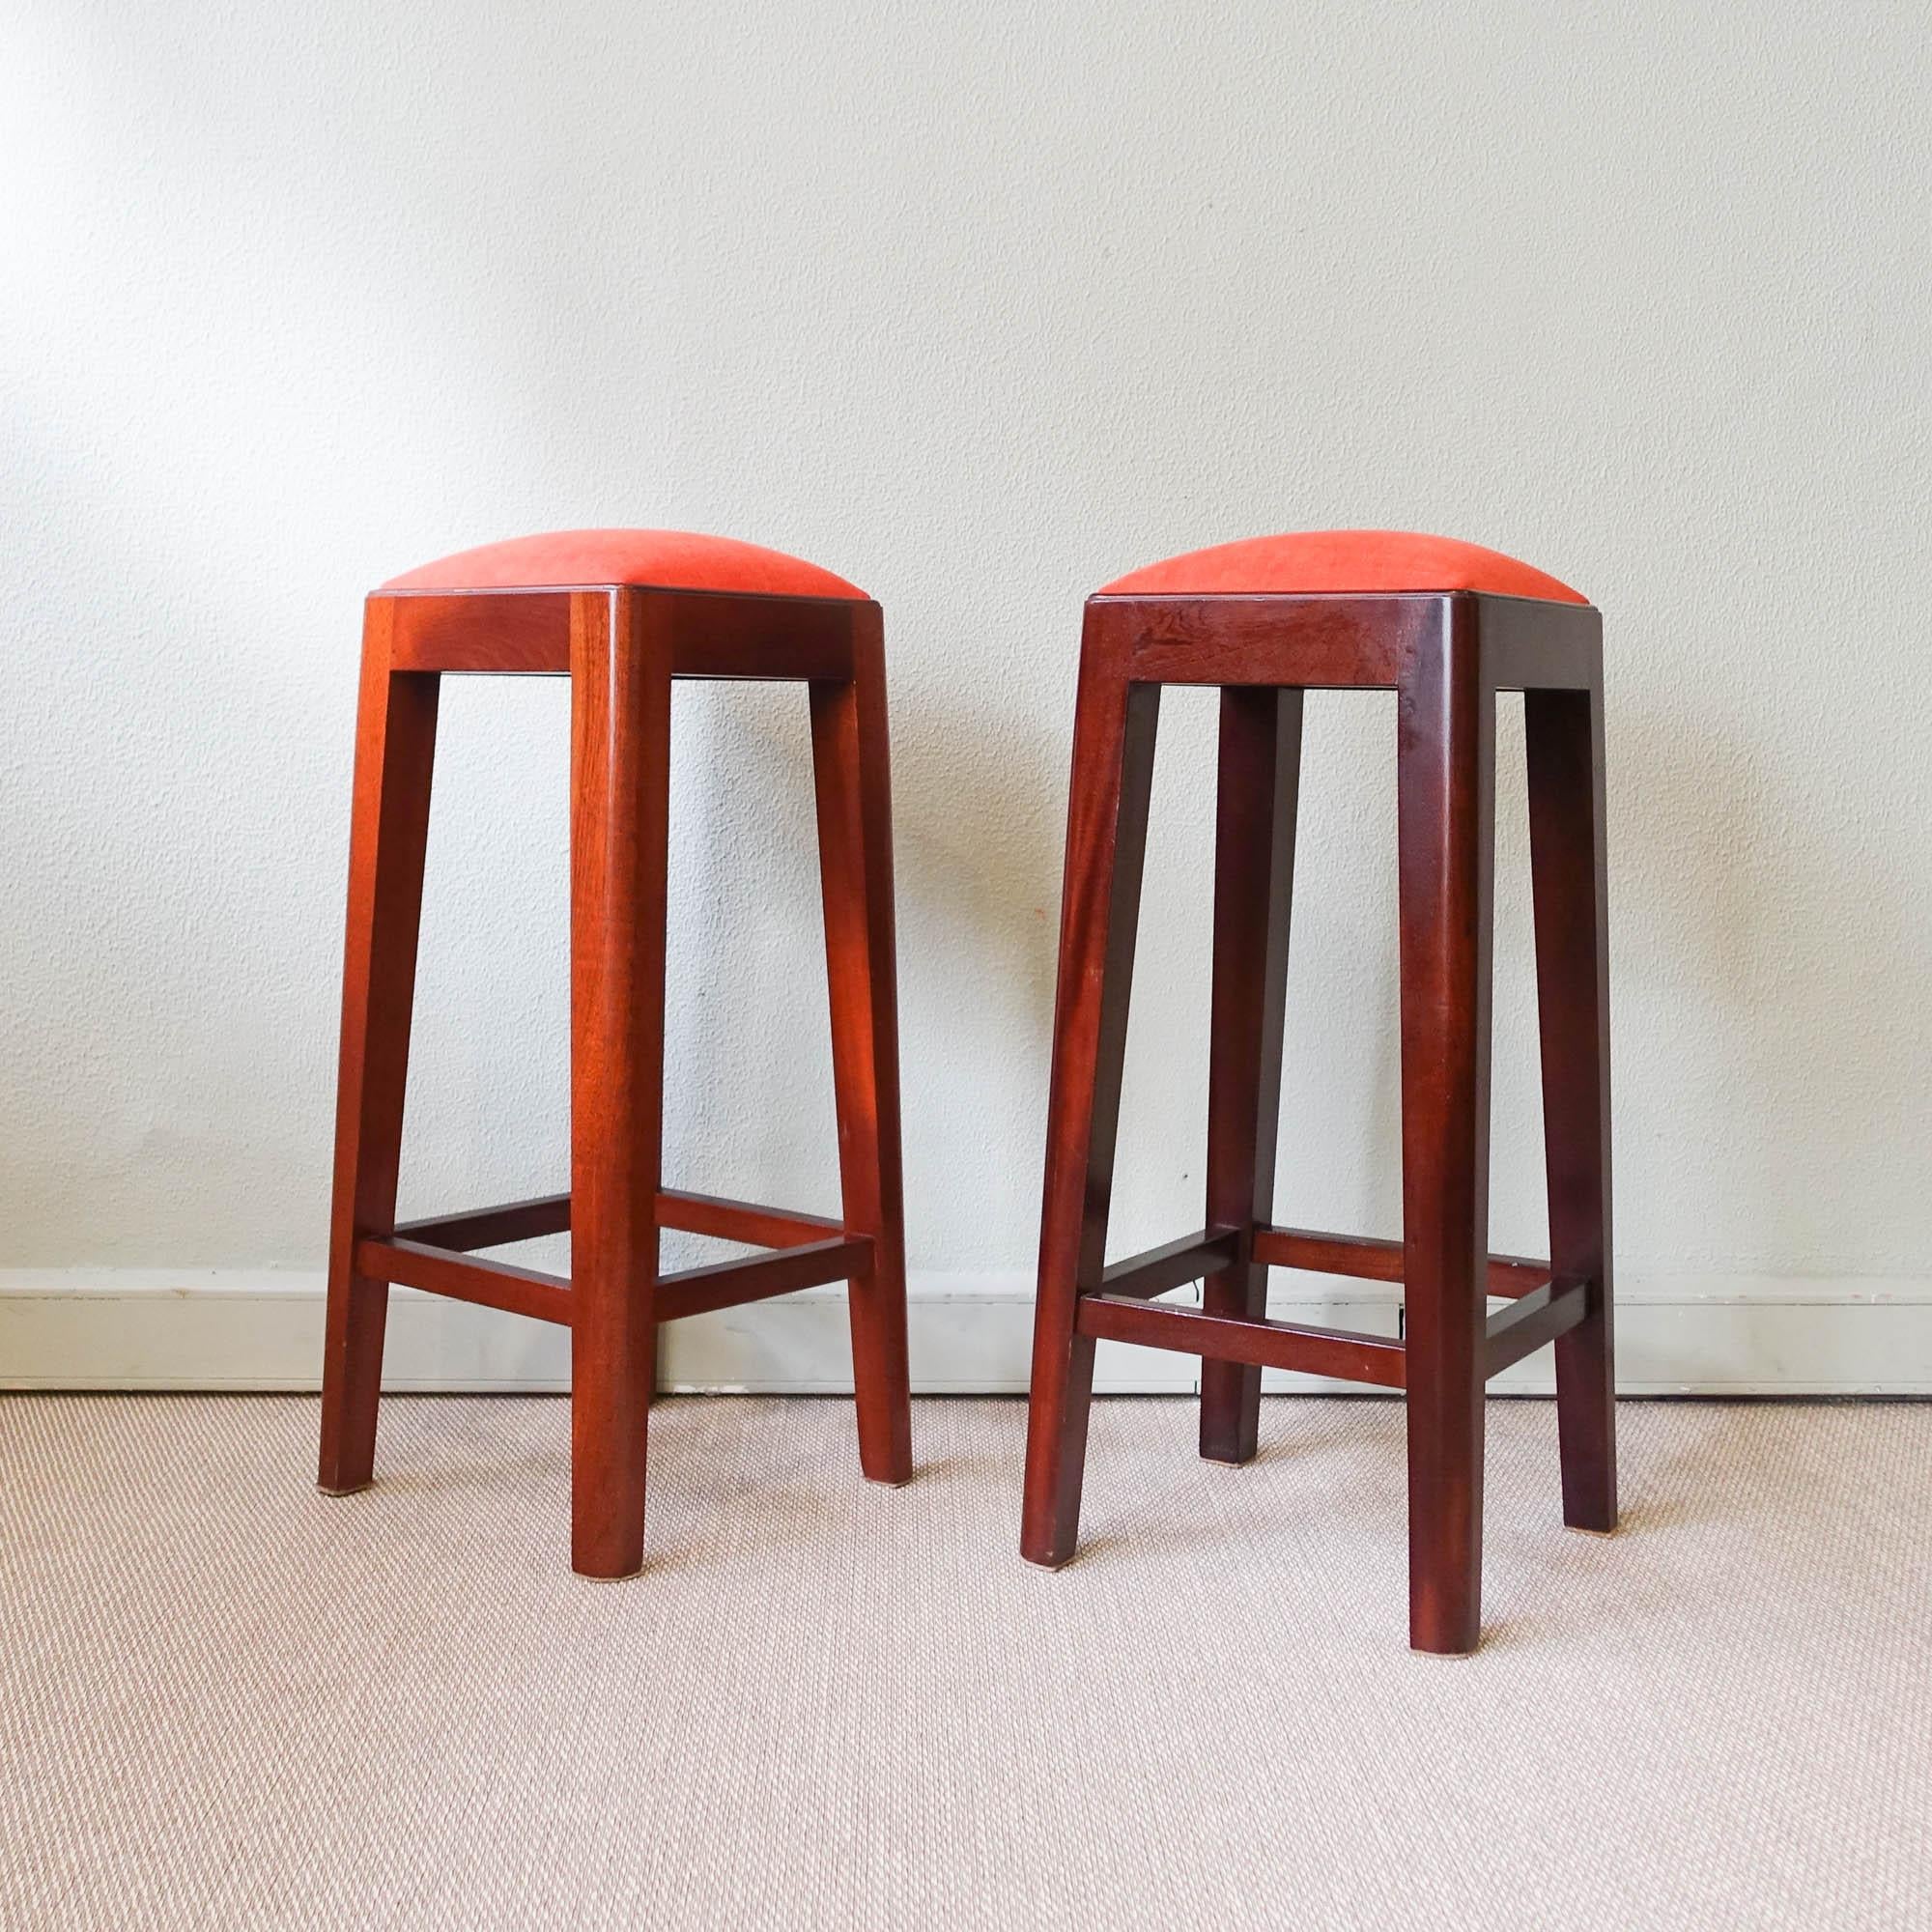 Pair of Vintage Portuguese High Stools, 1960's For Sale 4